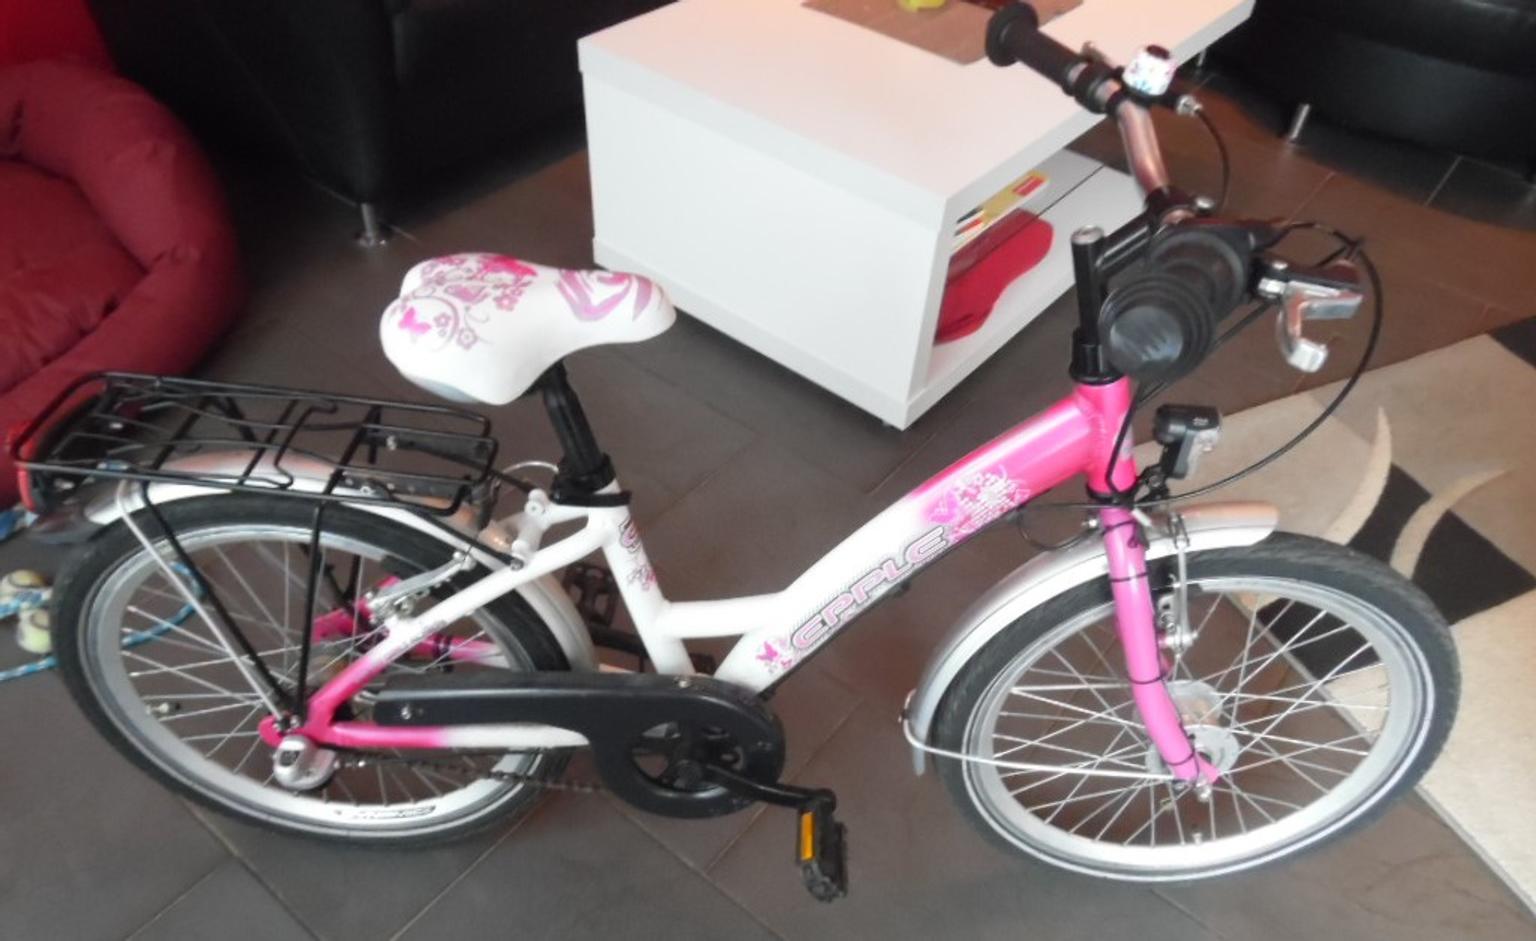 Kinderfahrrad 20 Zoll in 64319 Pfungstadt for €190.00 for